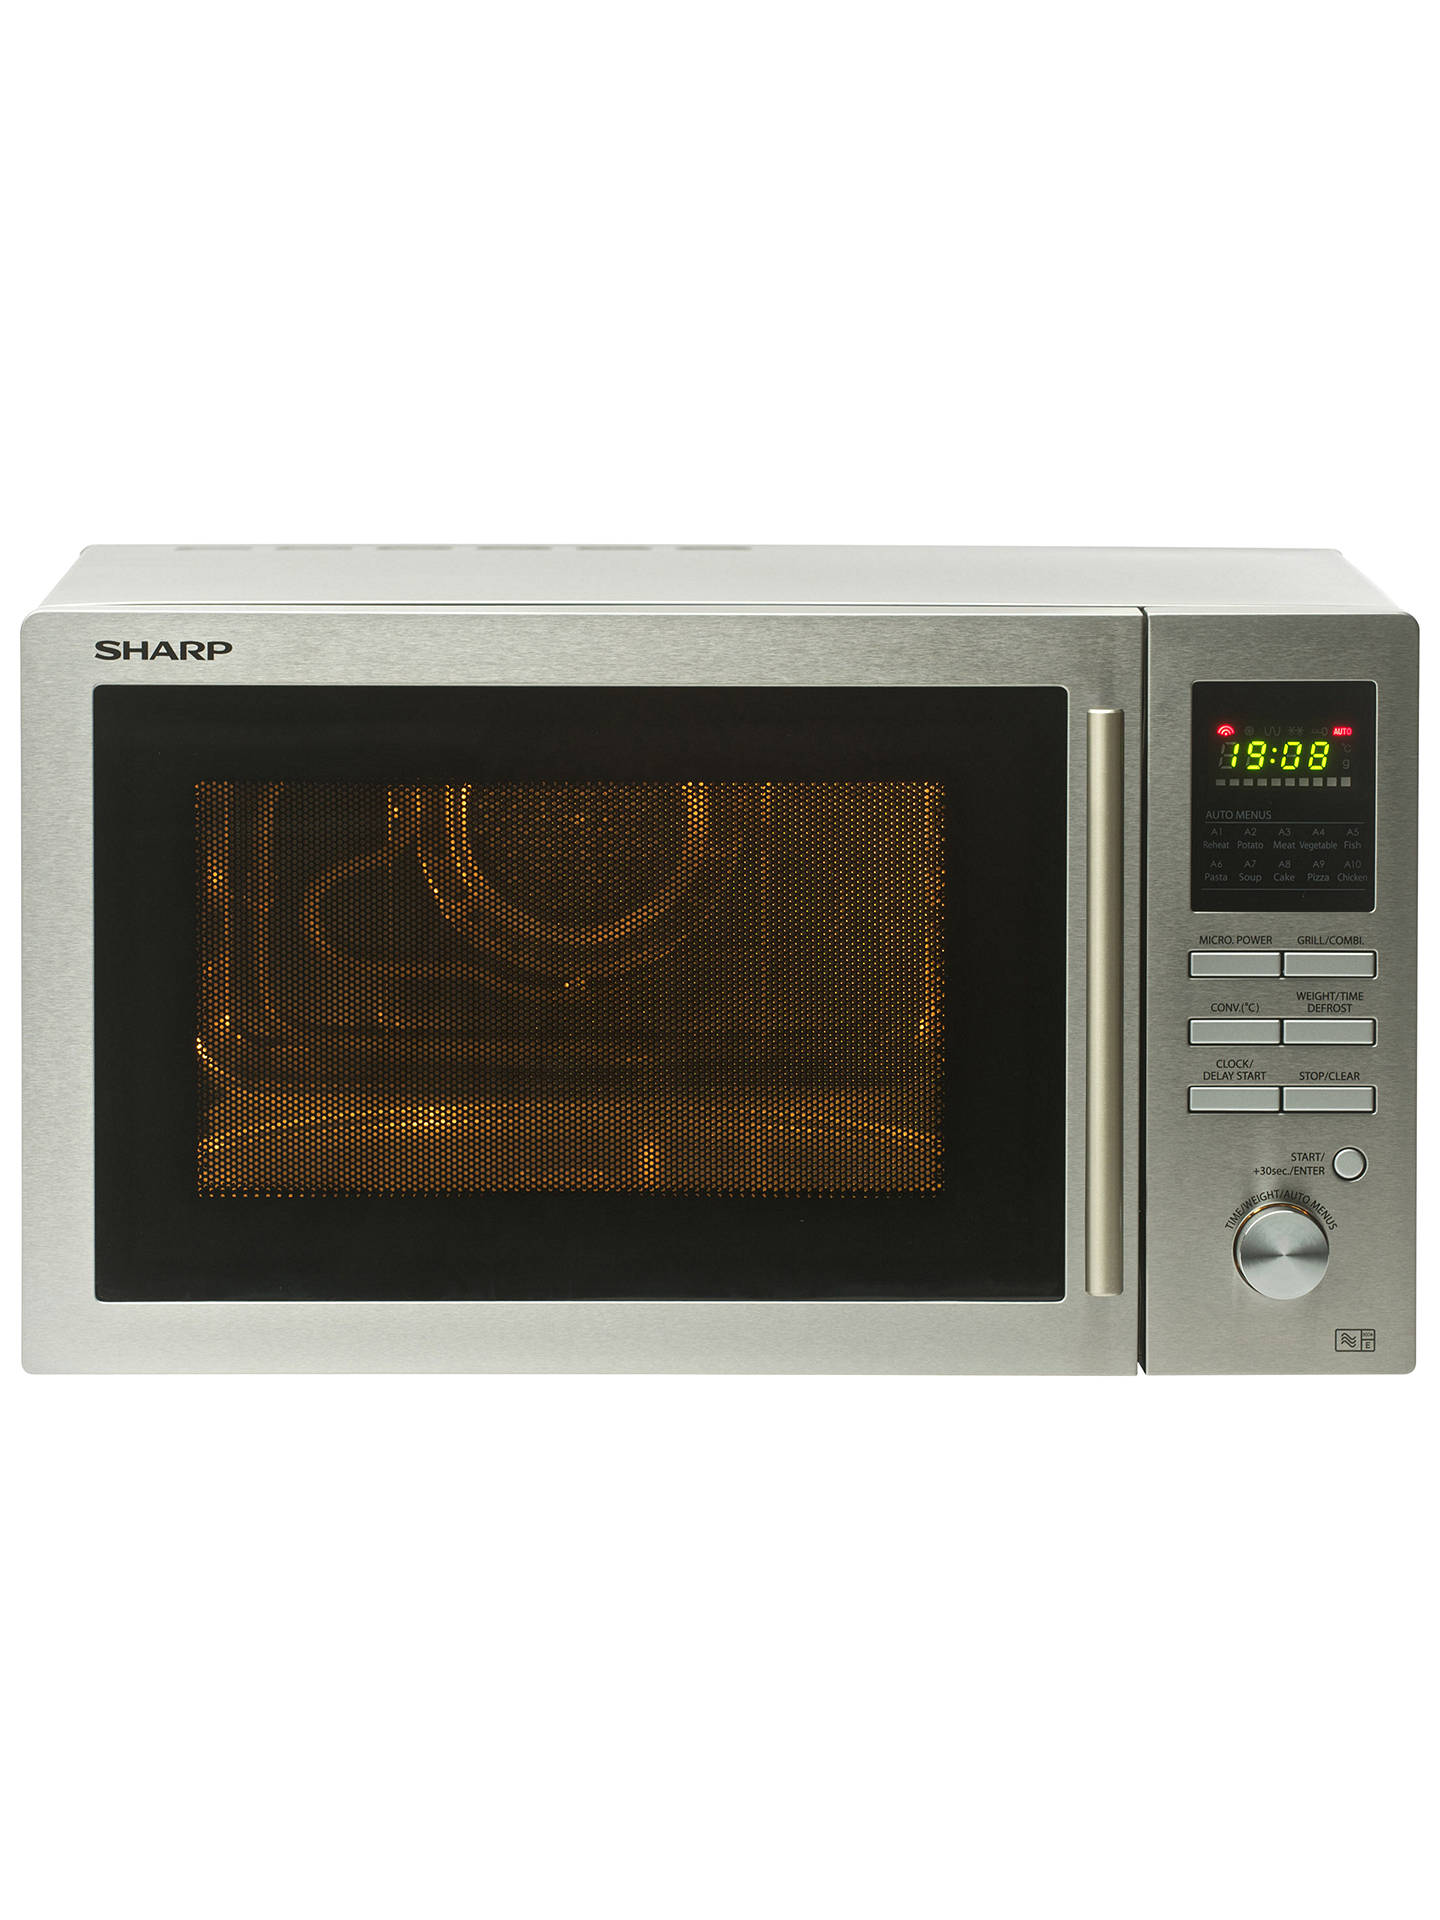 Sharp R82STMA Microwave with Grill, Stainless Steel at John Lewis